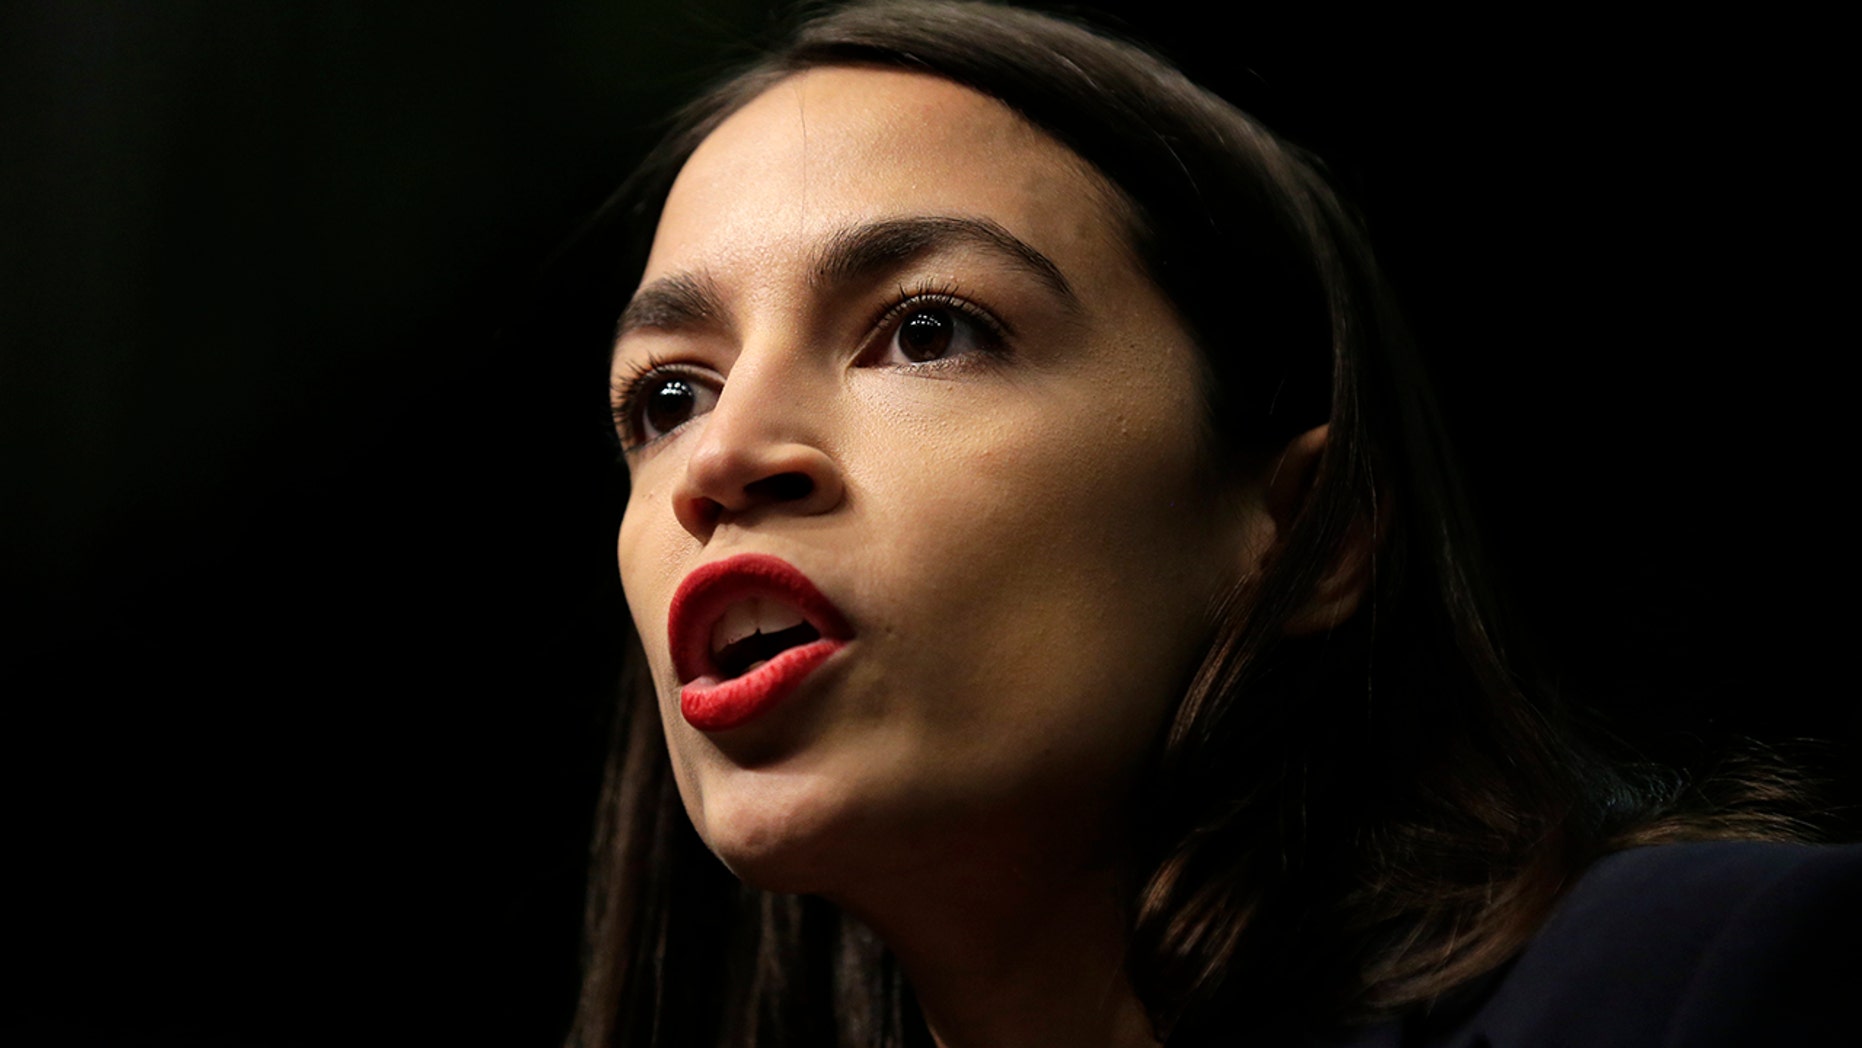 Rep. Alexandria Ocasio-Cortez, D-N.Y., Speaks at the National Action Network convention in New York on Friday, April 5, 2019. (AP Photo / Seth Wenig)